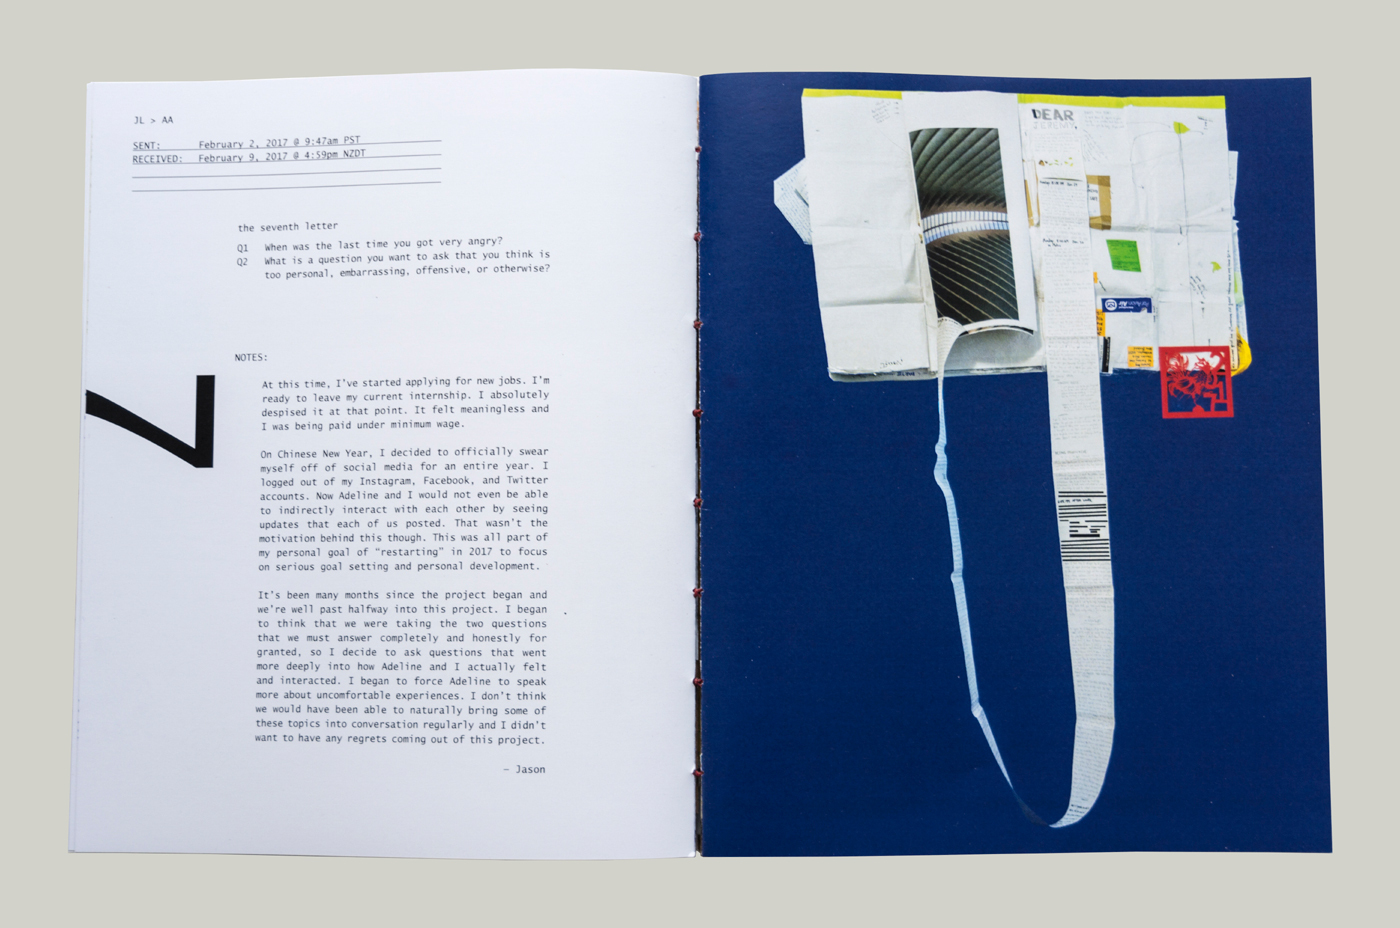 Letter 7 of 10 from The 10 Letters Project. On the left-hand page of the spread, is the number 7 and paragraph detailing the thoughts of the two artists. On the right-hand side is an image of the 7th letter which includes a long scroll-like paper.